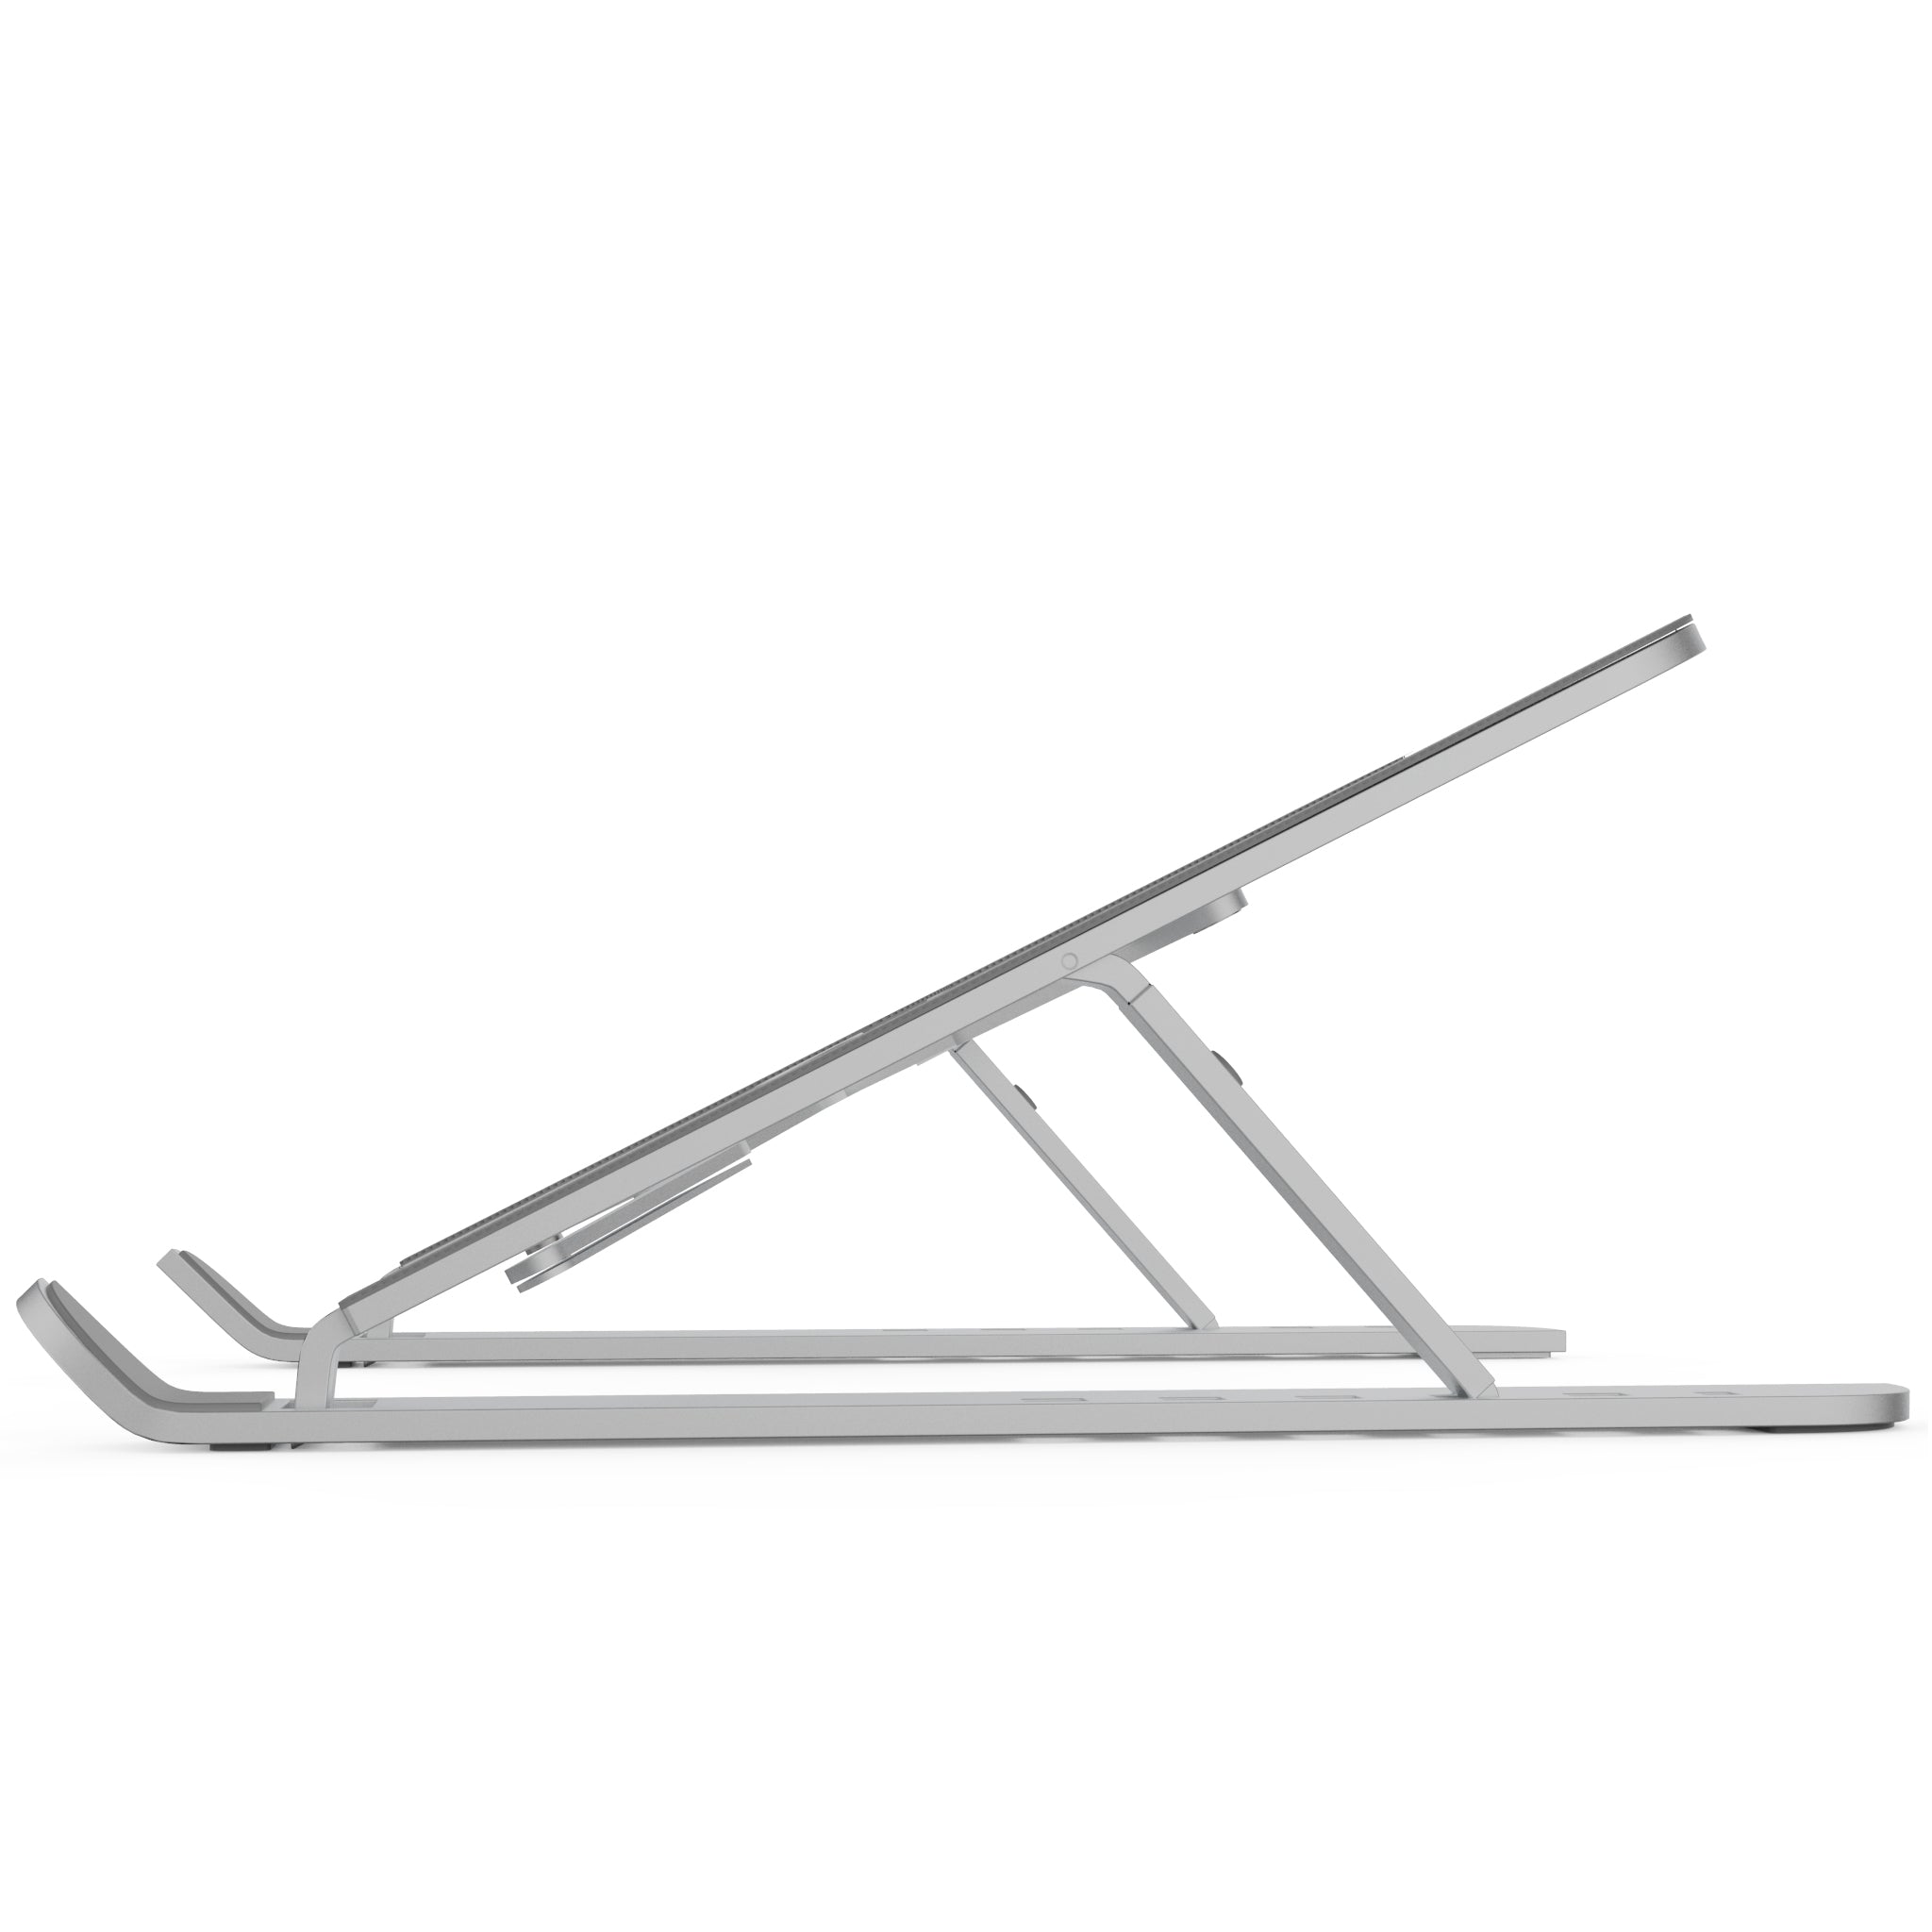 XStand   Ultra Compact Riser Stand